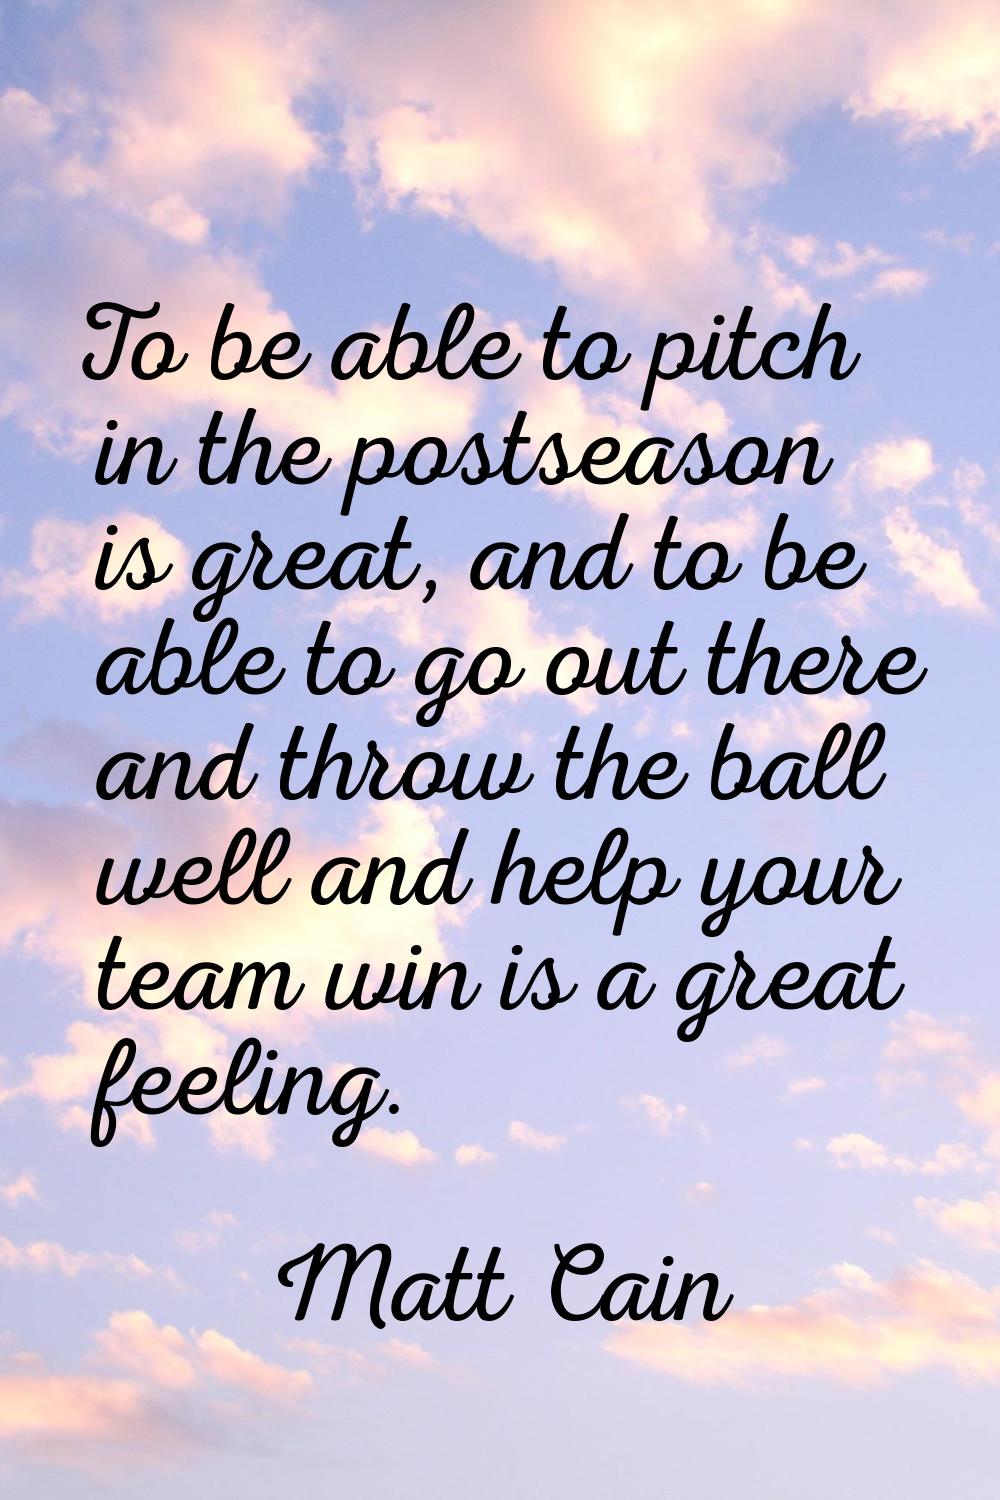 To be able to pitch in the postseason is great, and to be able to go out there and throw the ball w